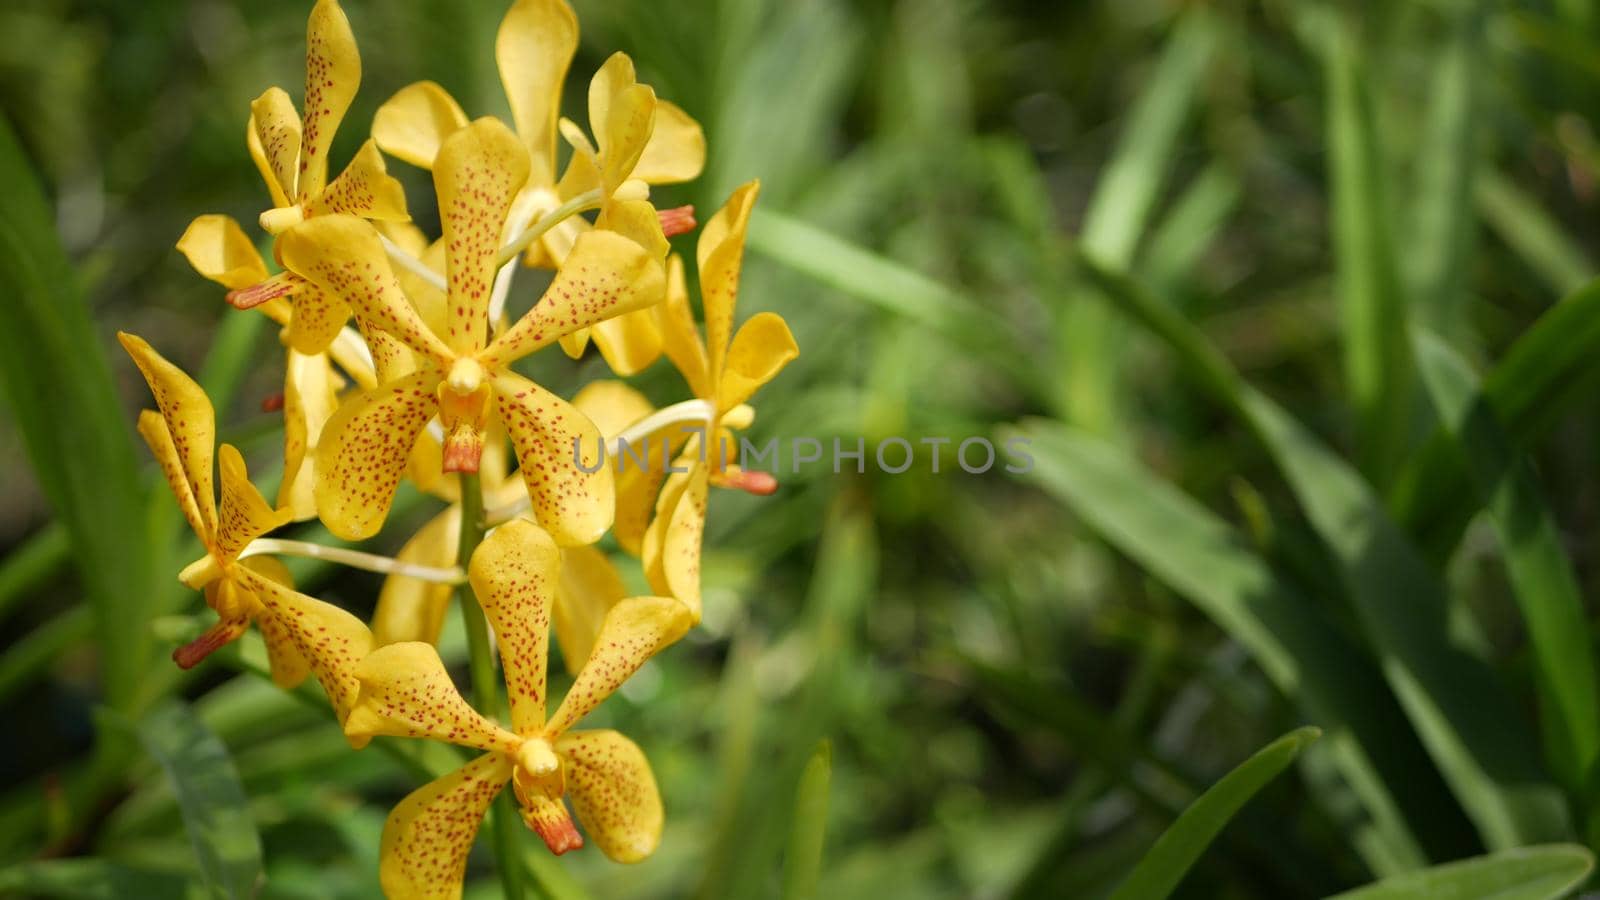 Blurred macro close up, colorful tropical orchid flower in spring garden, tender petals among sunny lush foliage. Abstract natural exotic background with copy space. Floral blossom and leaves pattern.